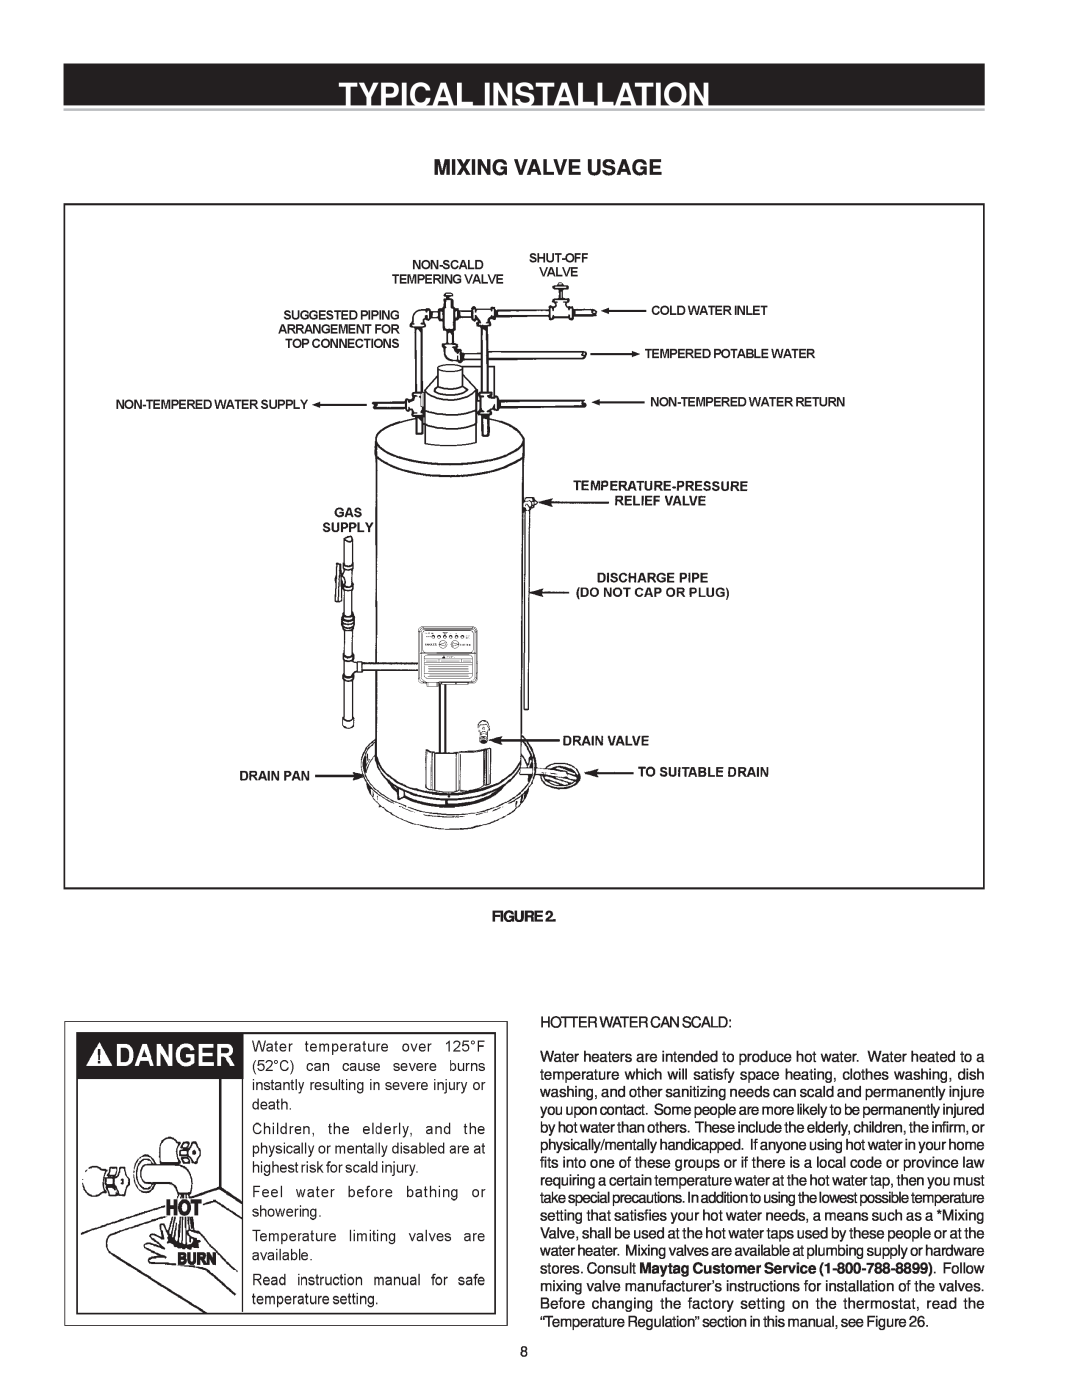 Maytag HV650HBVITCGA, HV640YBVITCGA, HV650YBVITCGA, HV640HBVITCGA manual Typical Installation, Mixing Valve Usage 